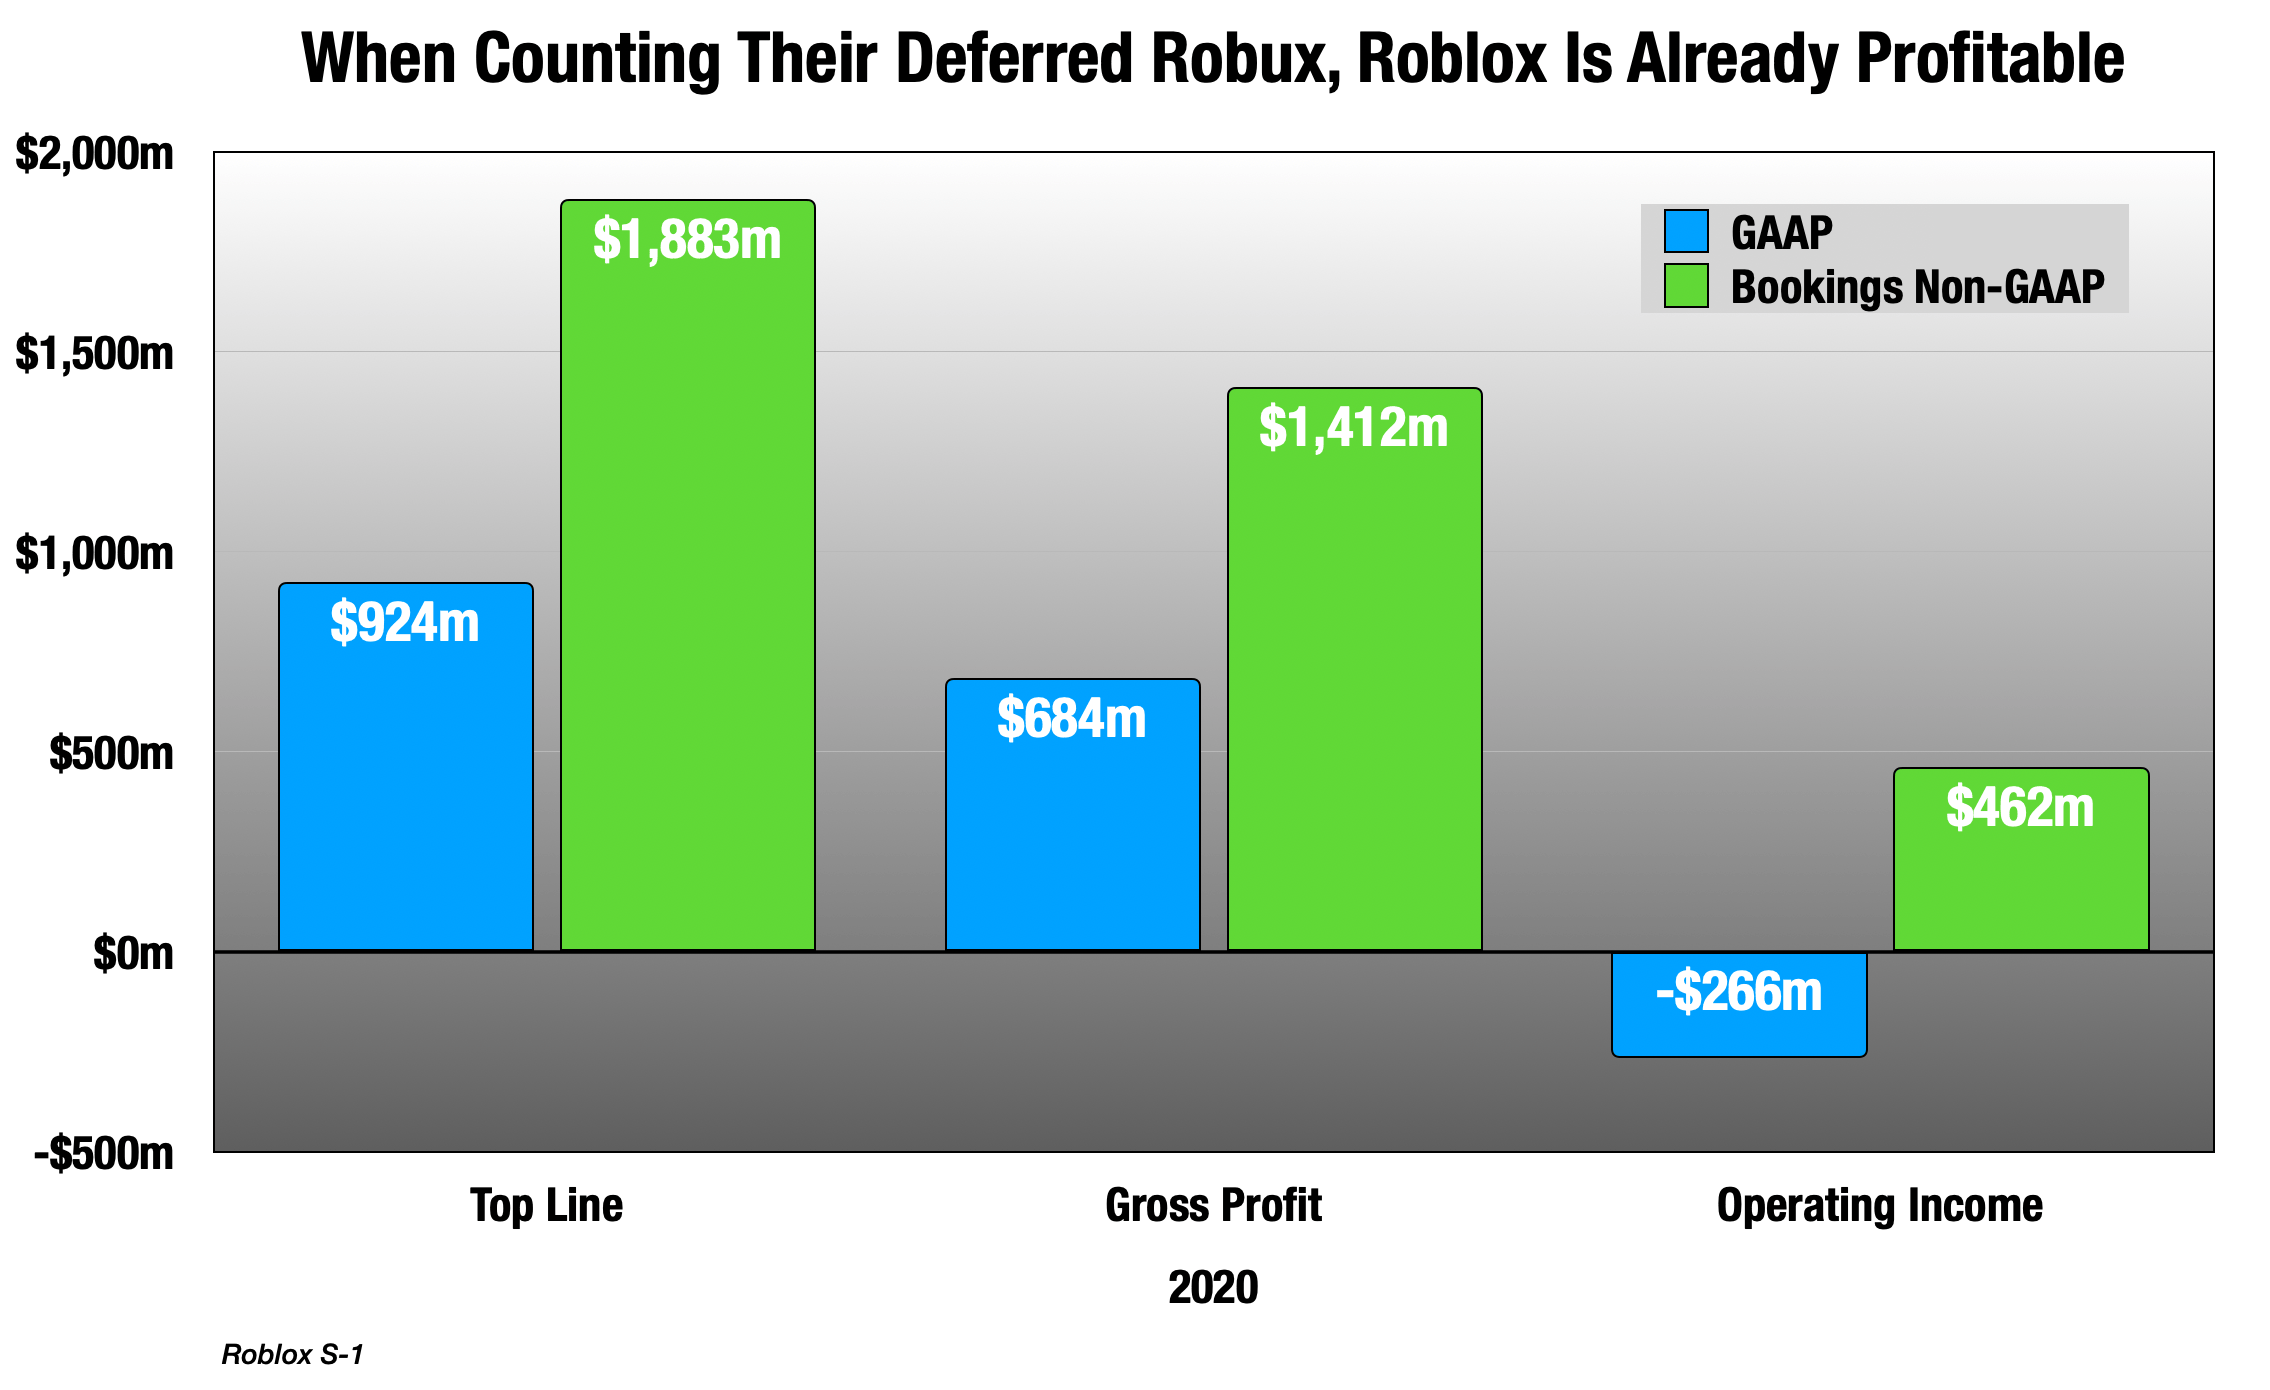 Roblox earnings flop: Is it game over for RBLX as user growth slows?